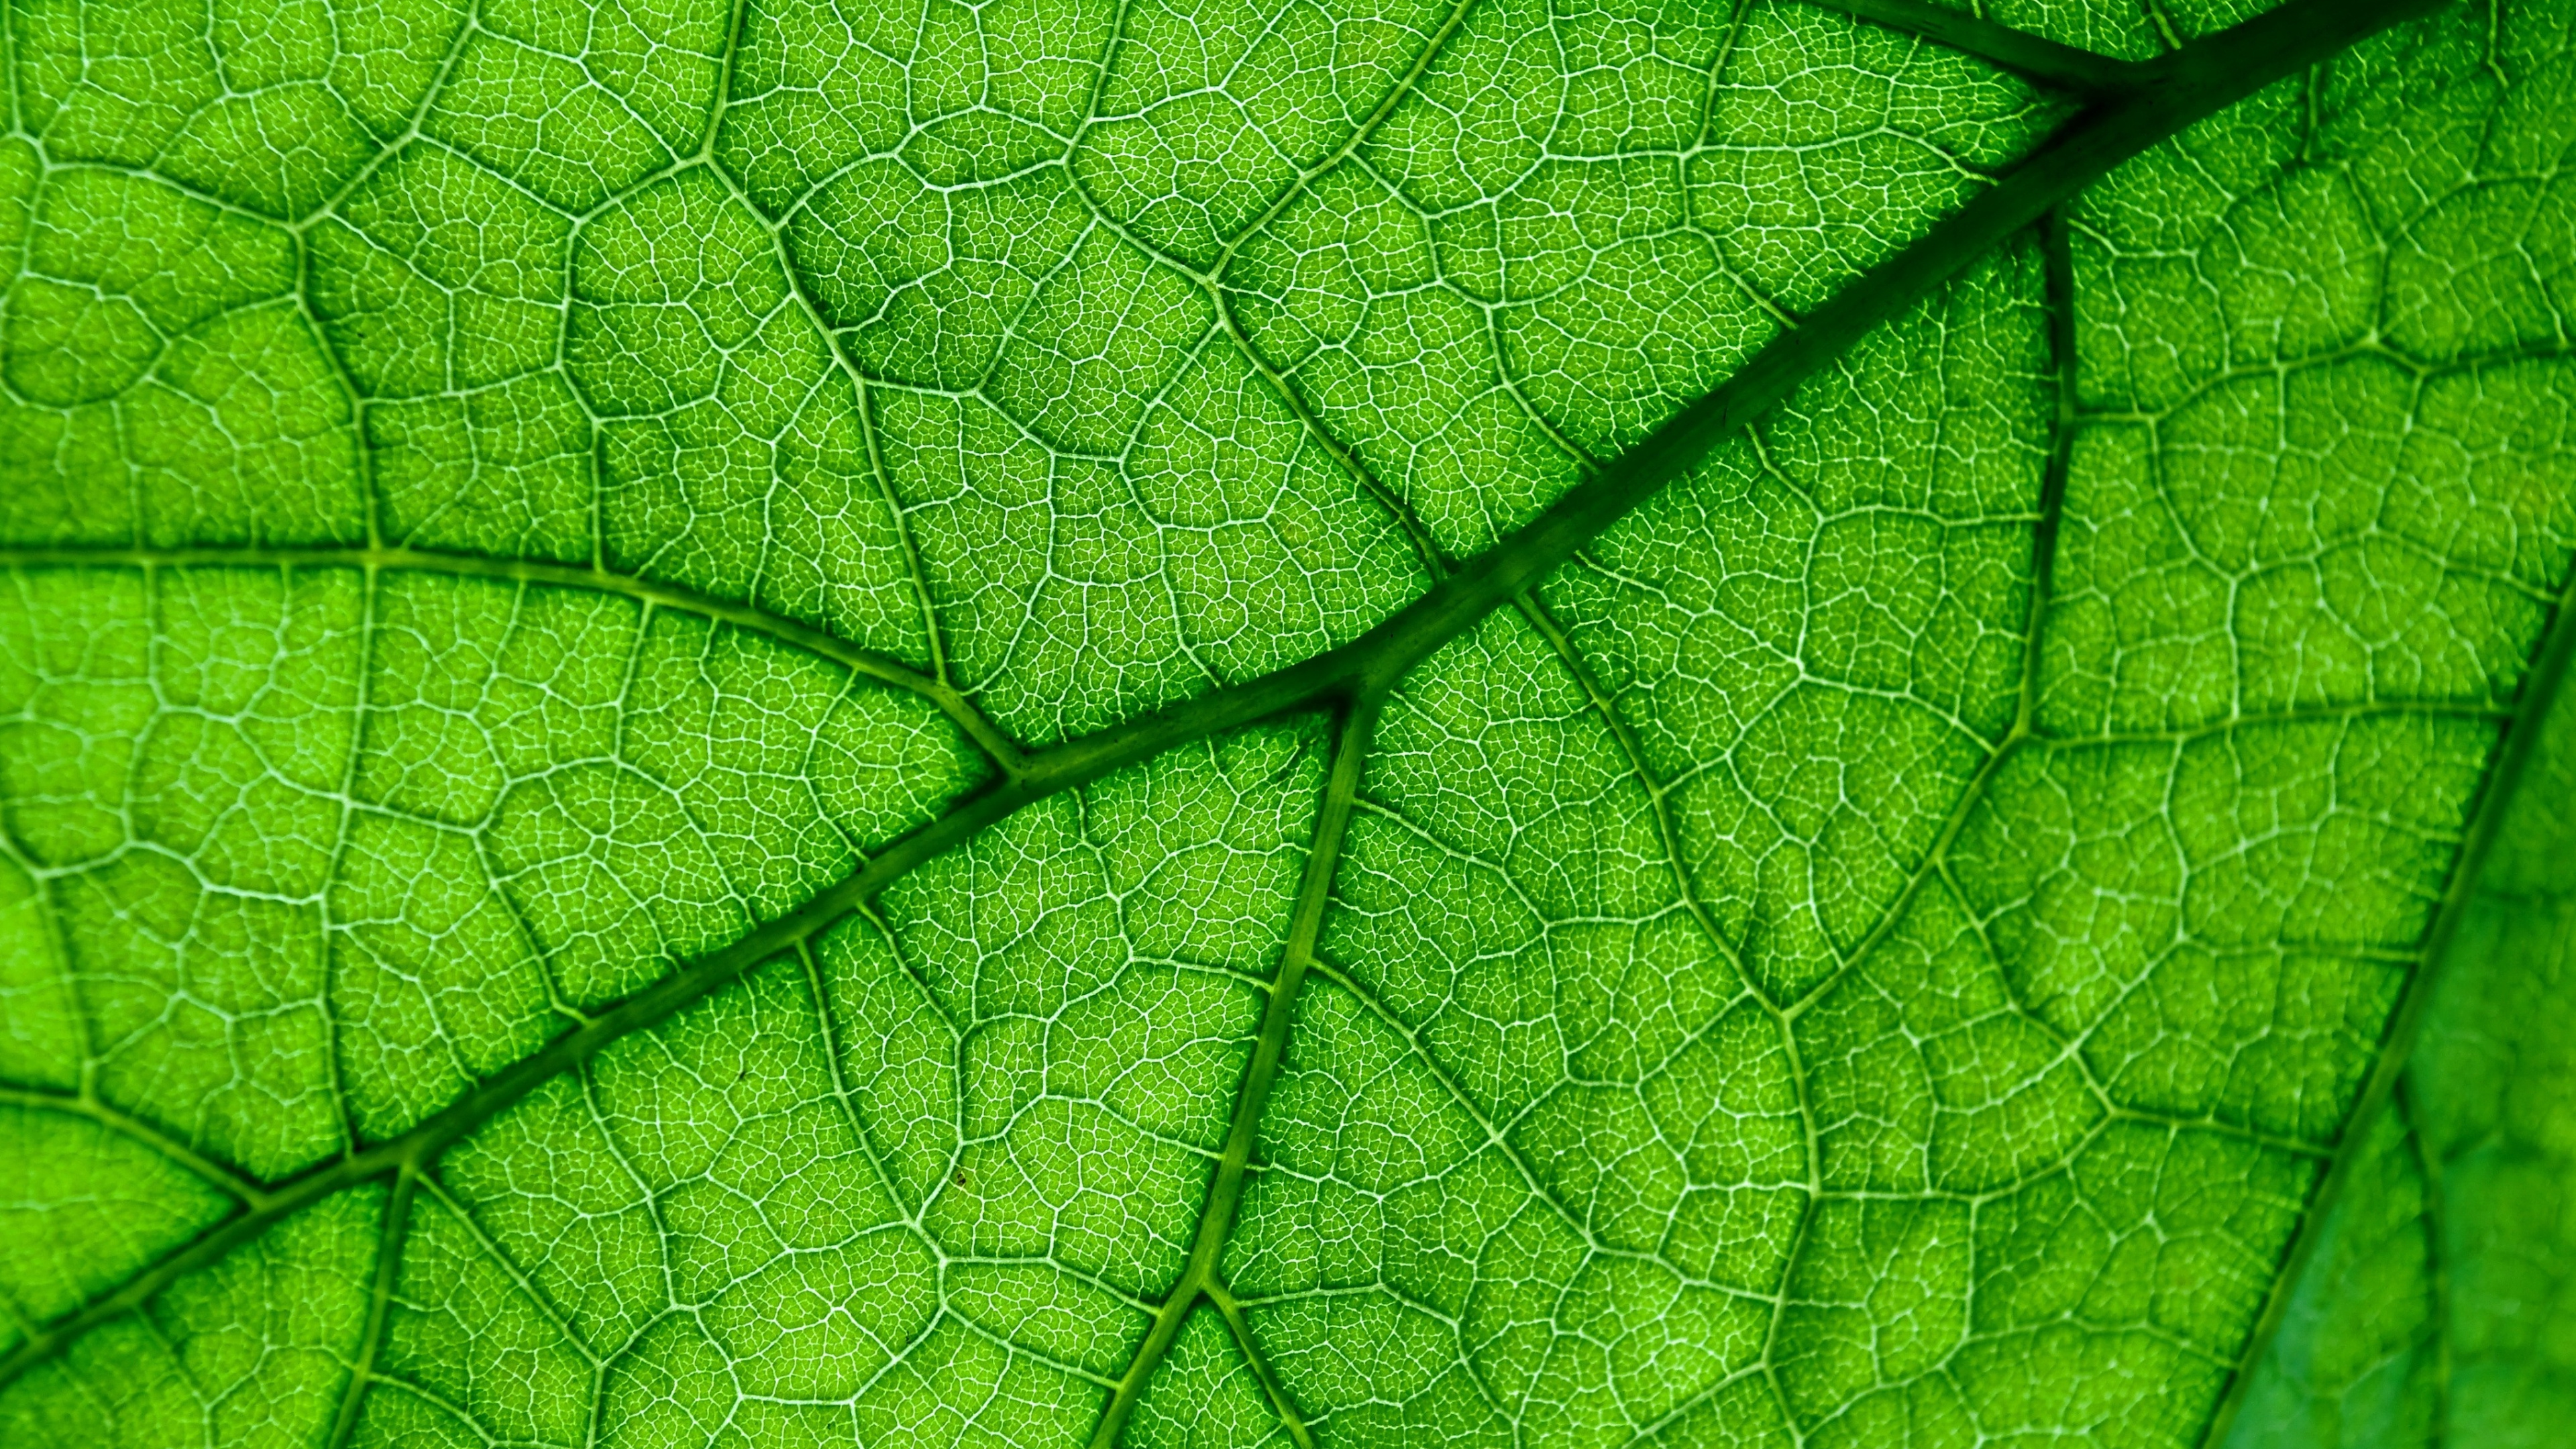 Green Leaf: Close-up view of the secondary veins, the midvein and the structure of a fern leaf. 3840x2160 4K Background.